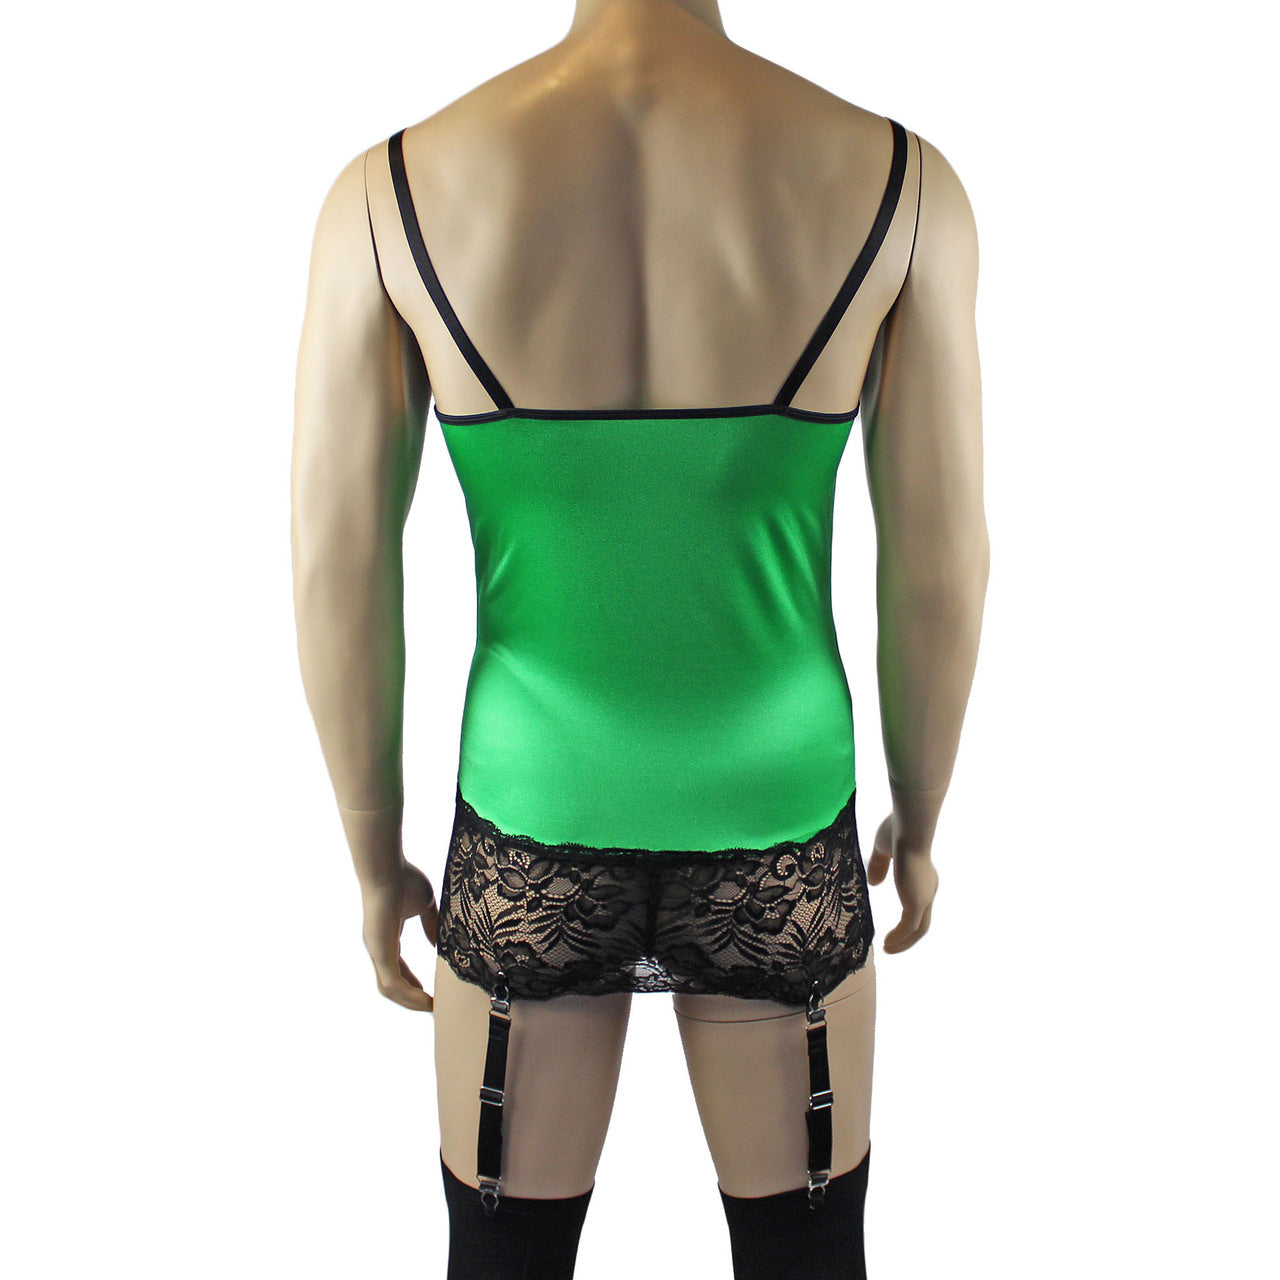 Mens Risque Camisole Mini Dress Chemise & G string (green and black plus other colours)